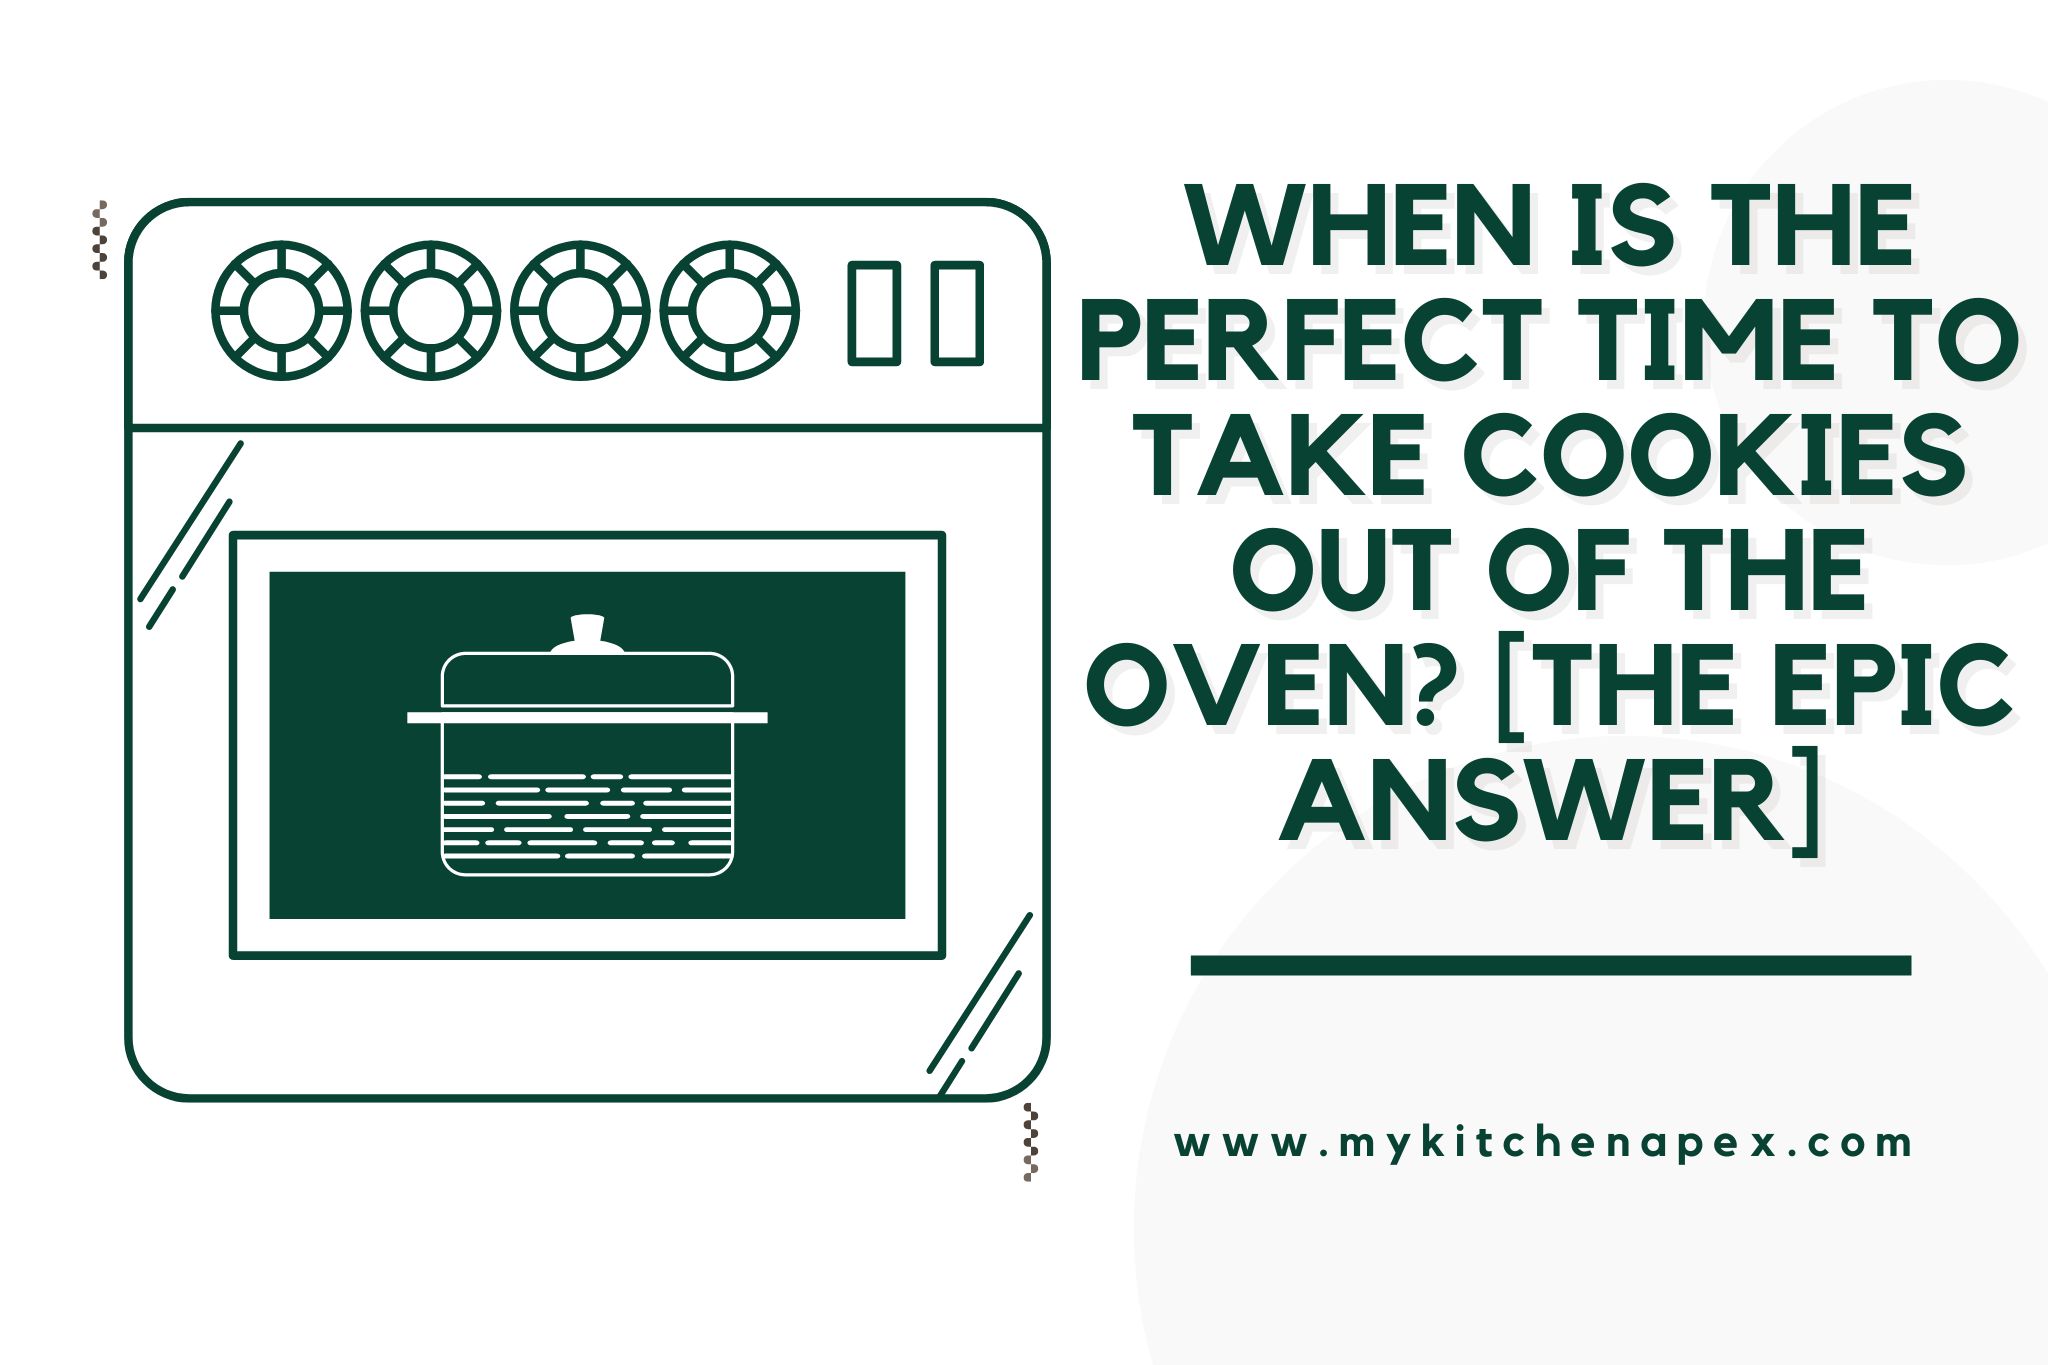 When Is The Perfect Time To Take Cookies Out Of The Oven? [The EPIC Answer]